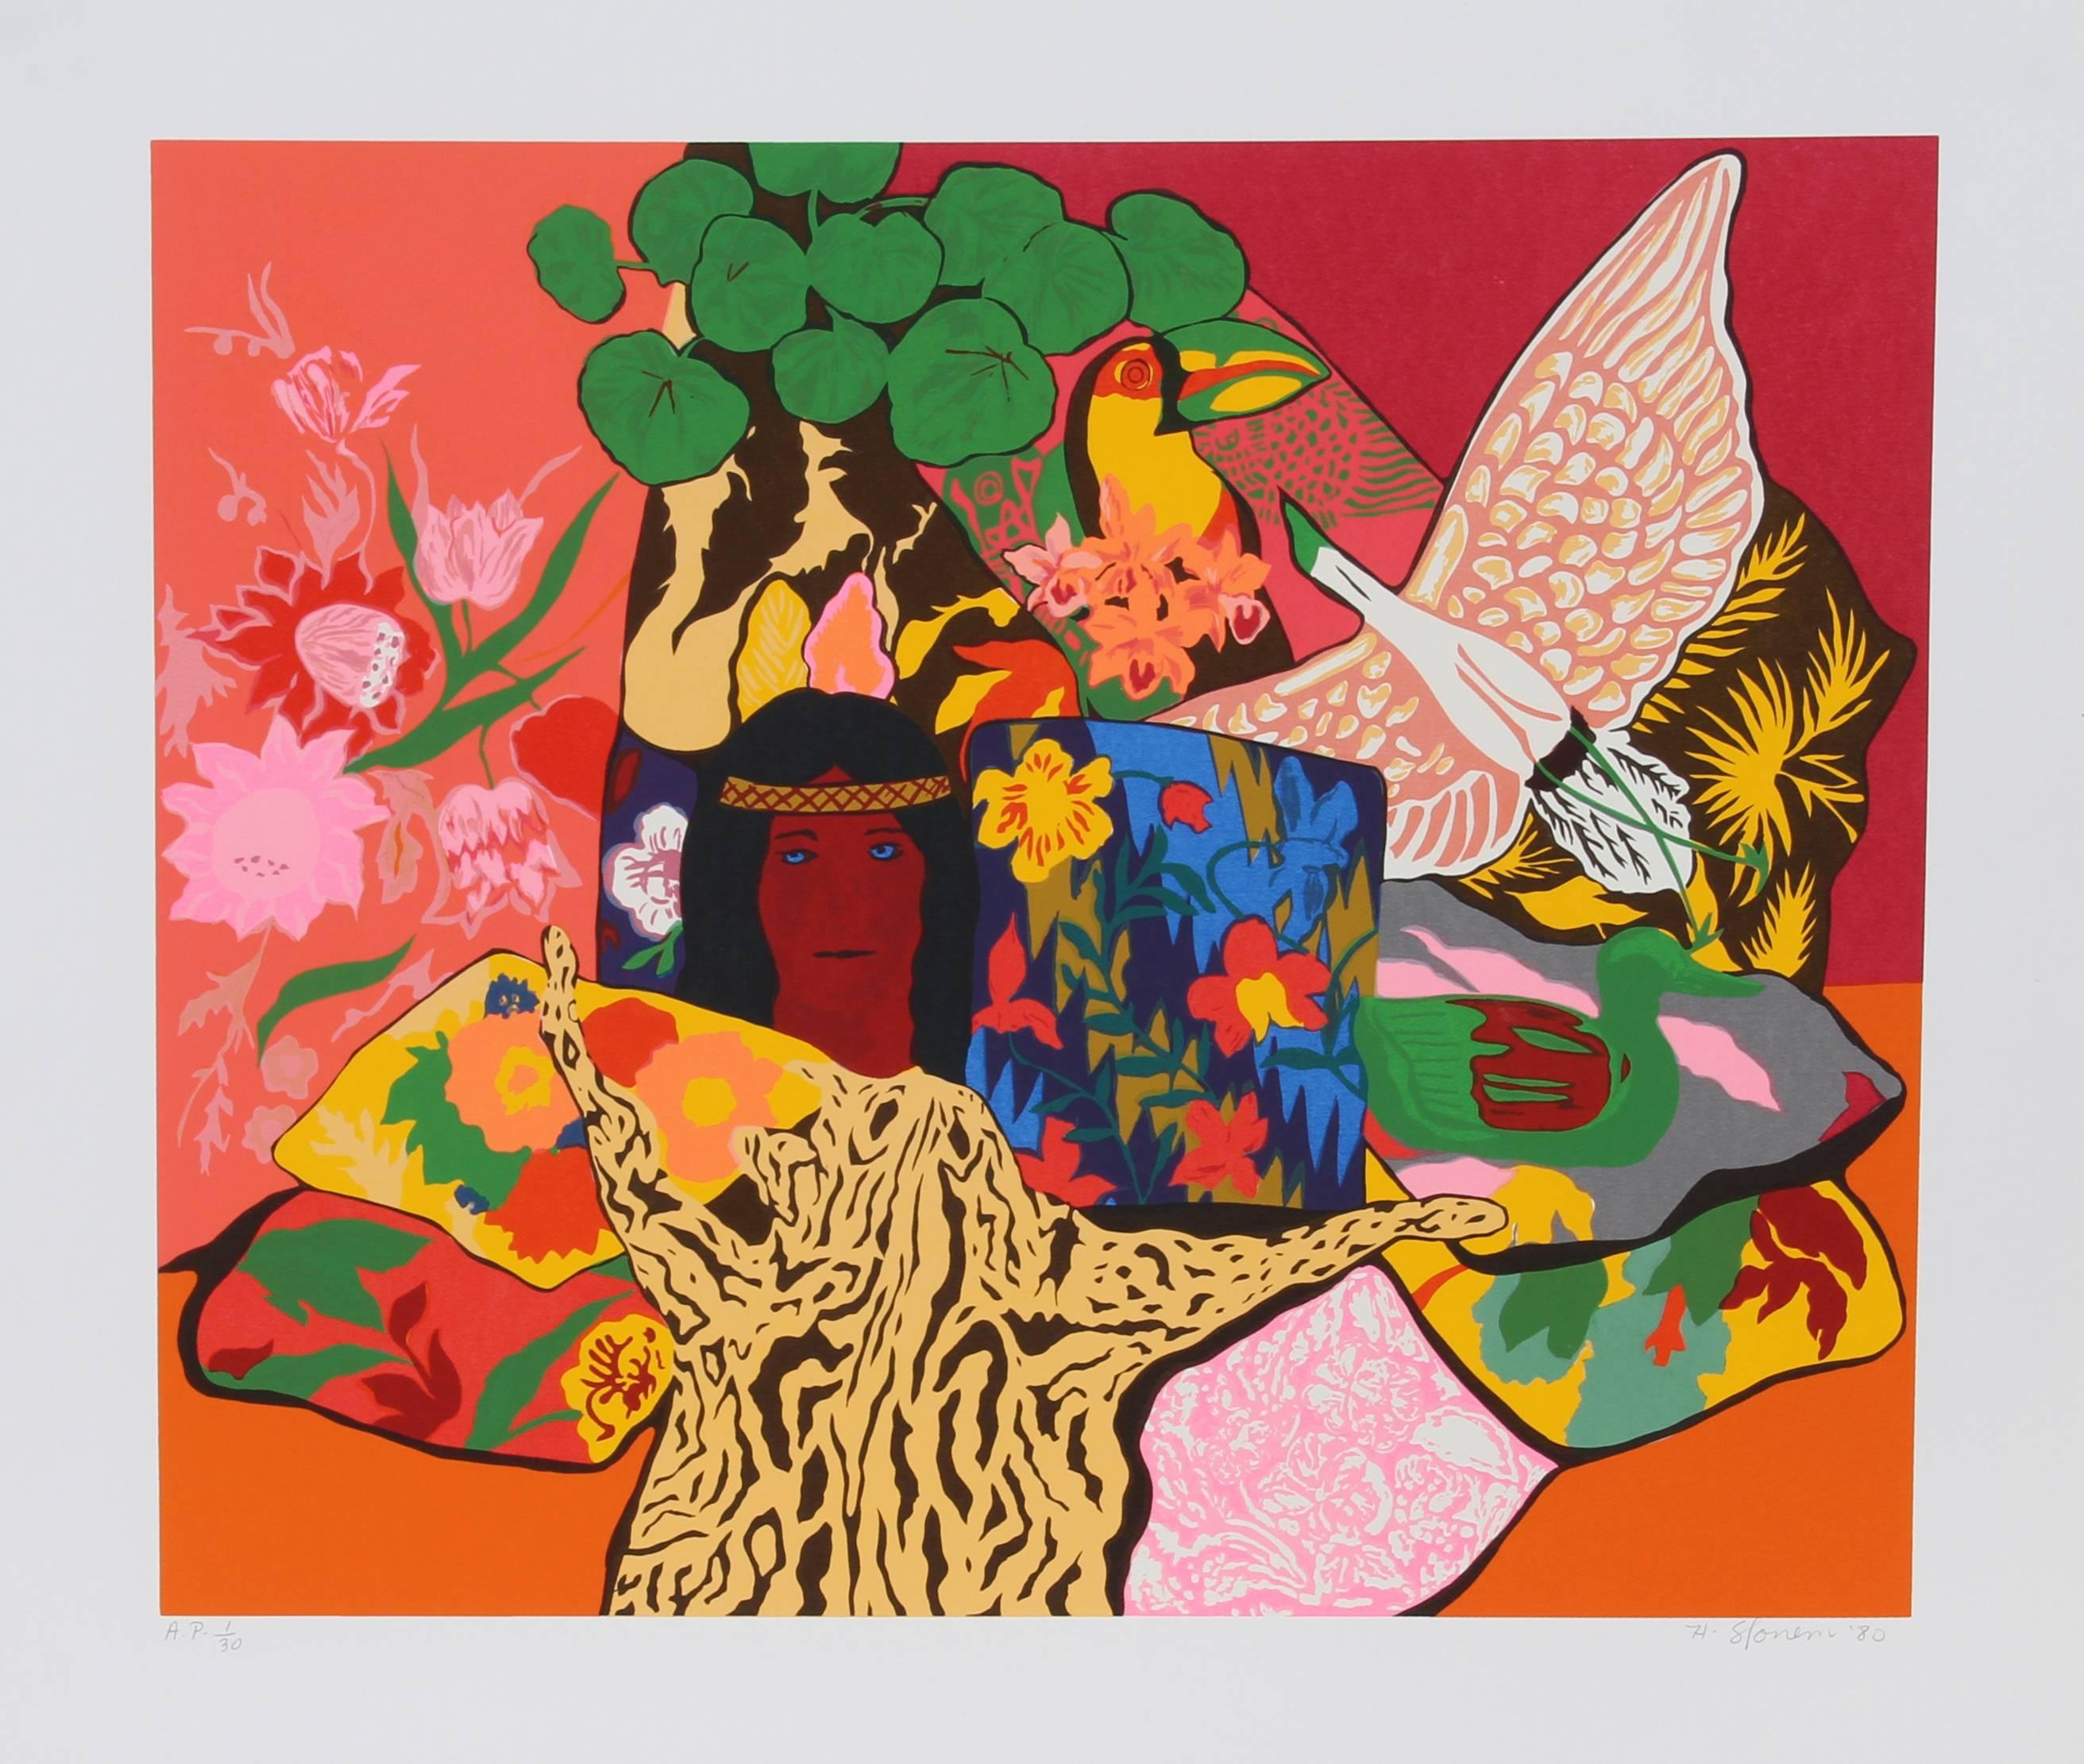 This serigraph was created by contemporary American artist Hunt Slonem. Slonem is best known for his Neo-Expressionist paintings and bright tropical palette, and his subject matter often includes tropical birds, based on a personal aviary in which